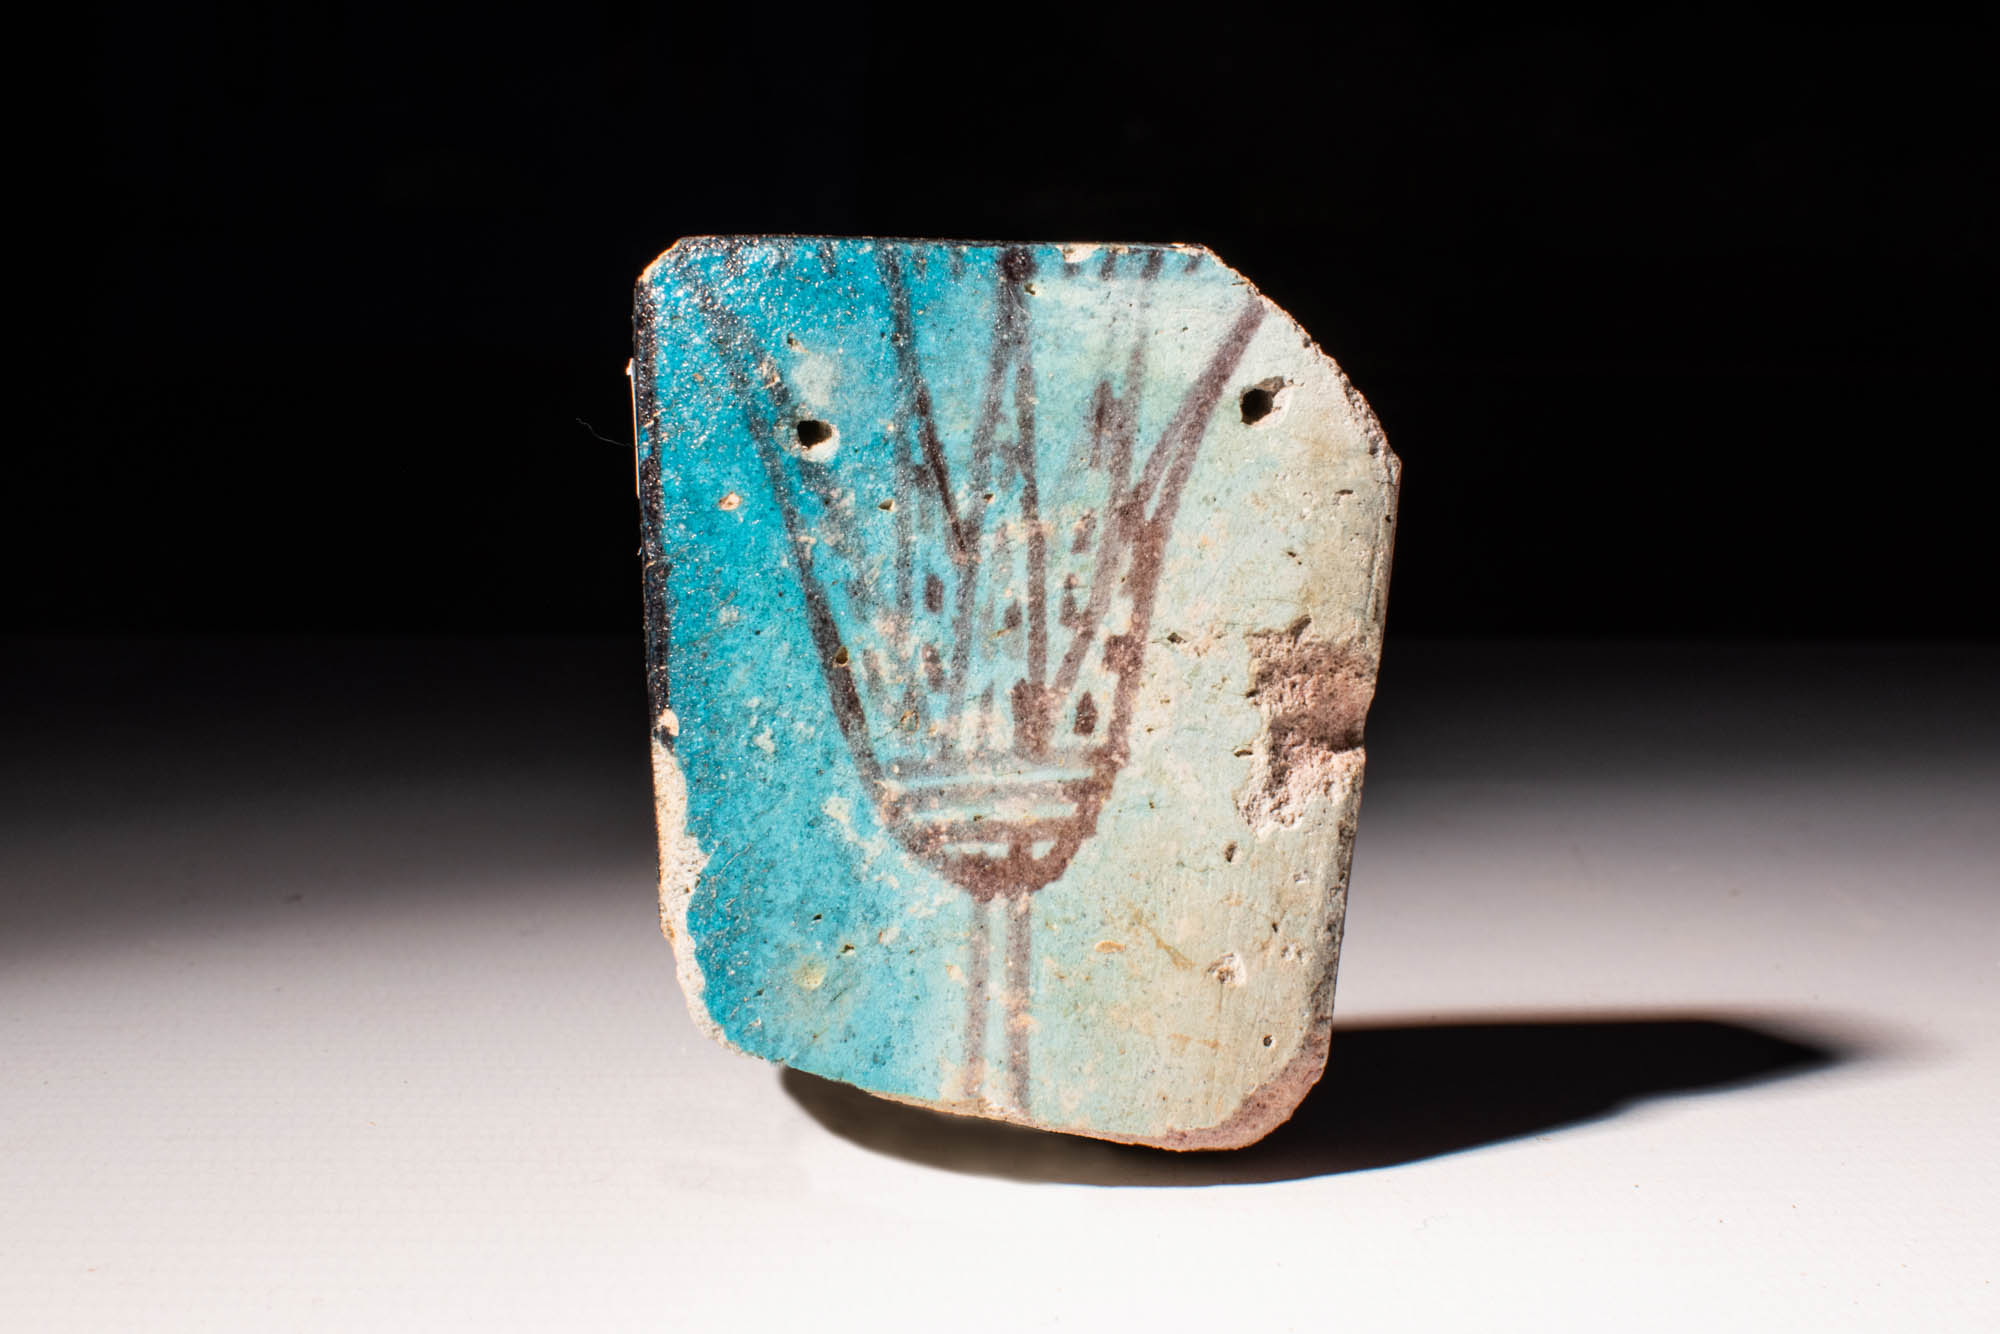 EGYPTIAN NEW KINGDOM FAIENCE PLAQUETTE DEPICTING A LOTUS FLOWER - Image 3 of 3